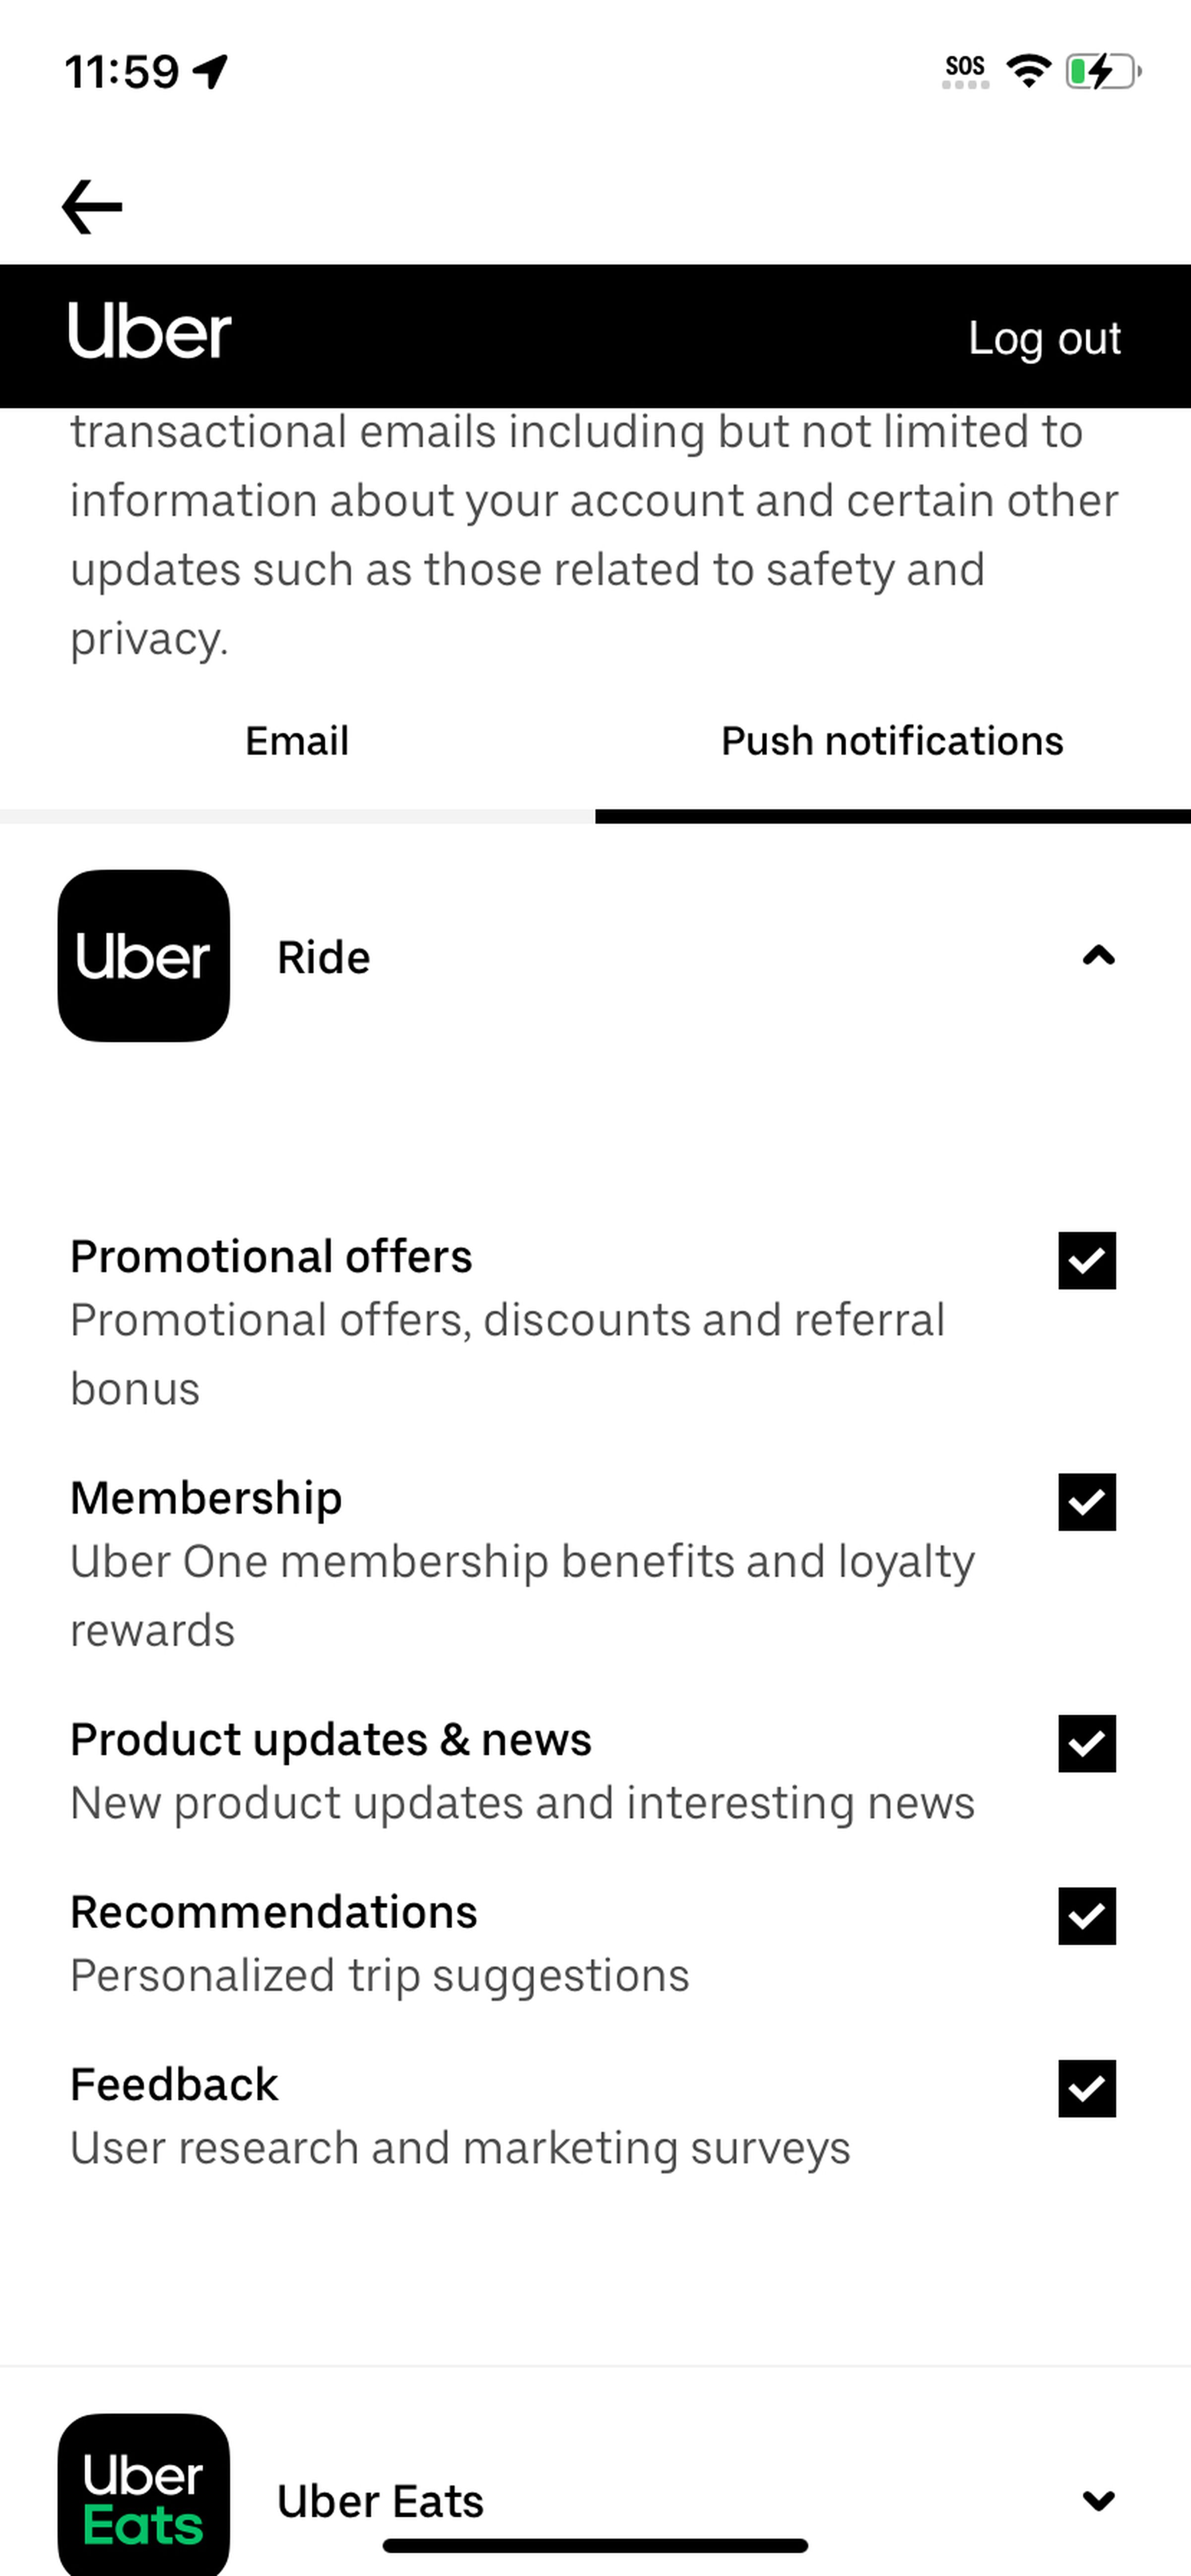 List of promotional offers